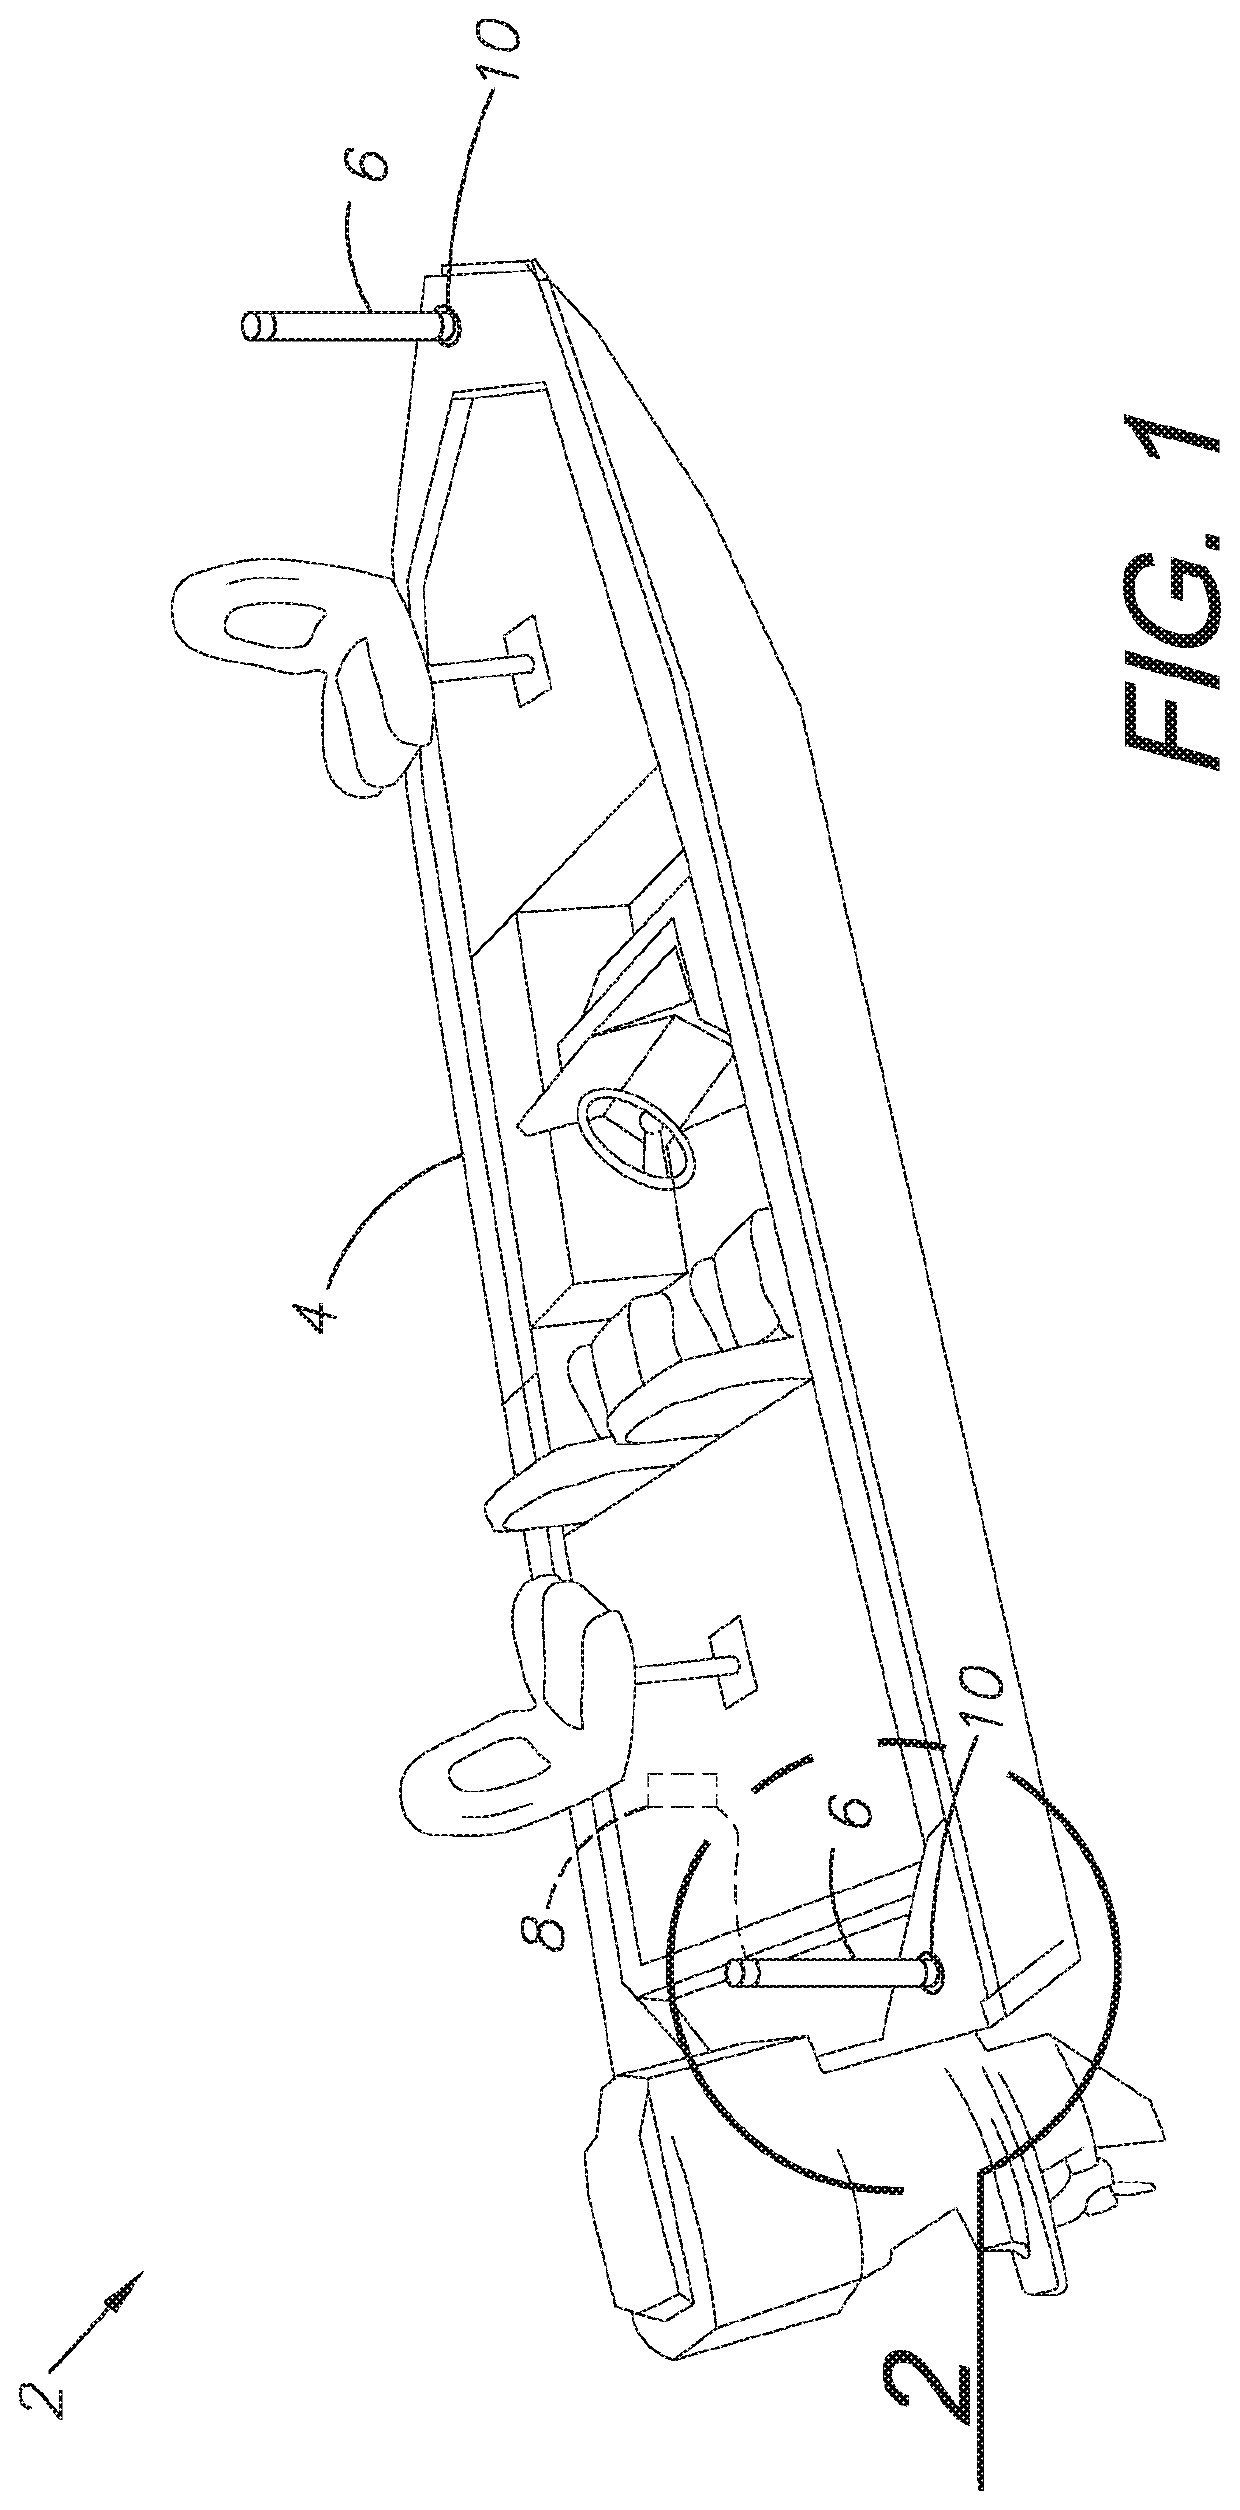 Kayak power port and rail system and method of attachment